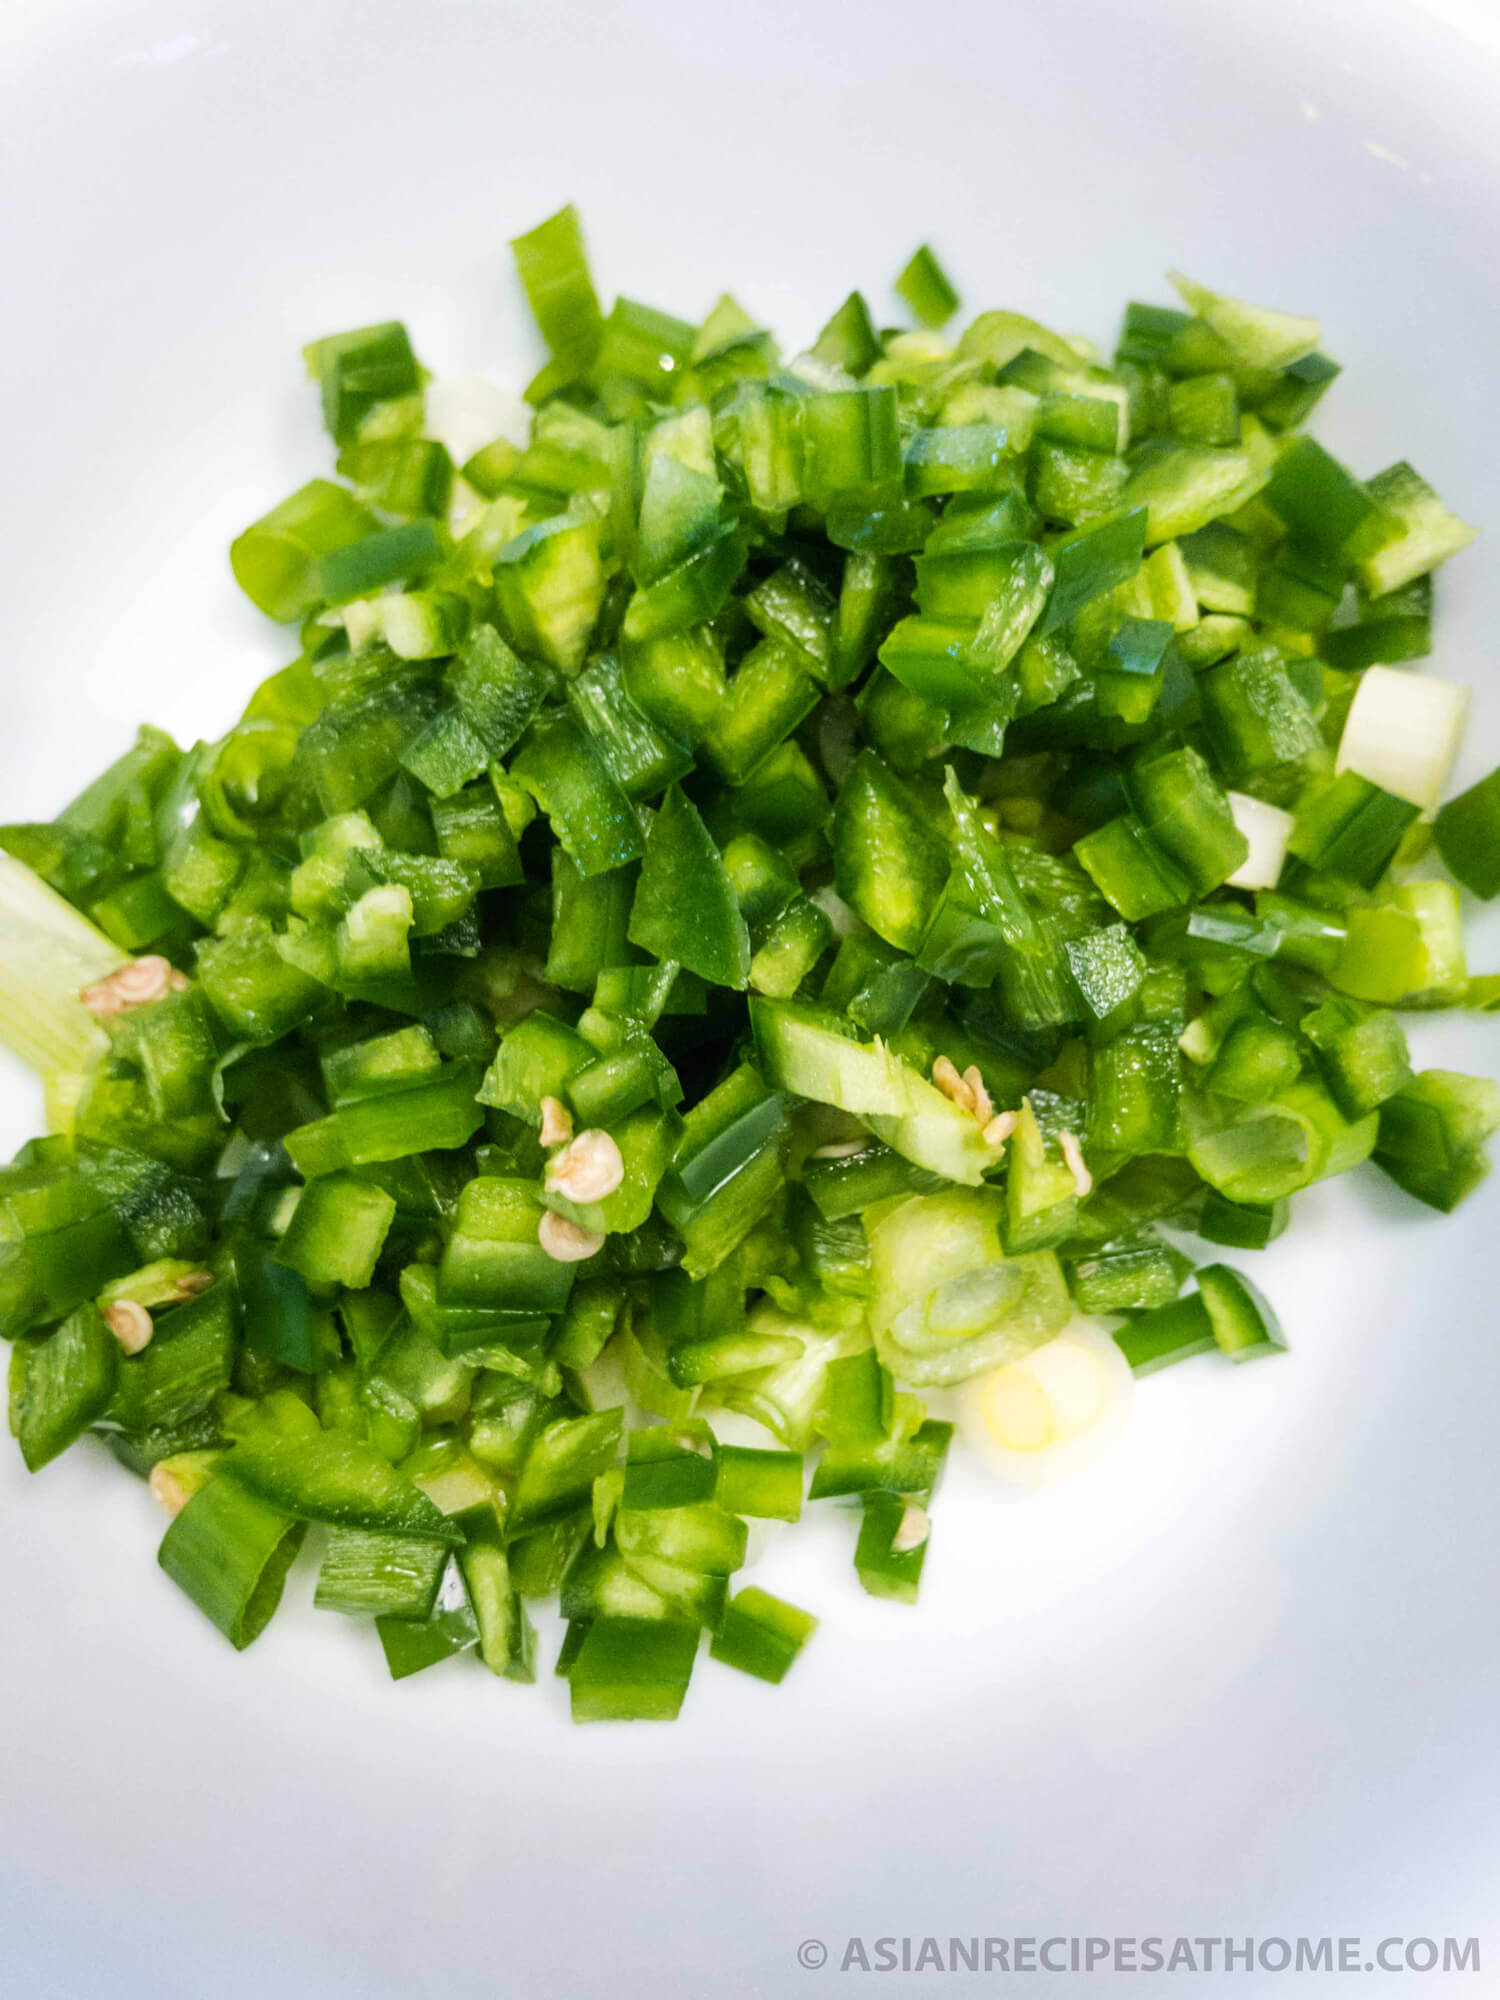 Fresh finely diced jalapenos prepped for the Asian-style Jalapeno and Green Onion Sauce.